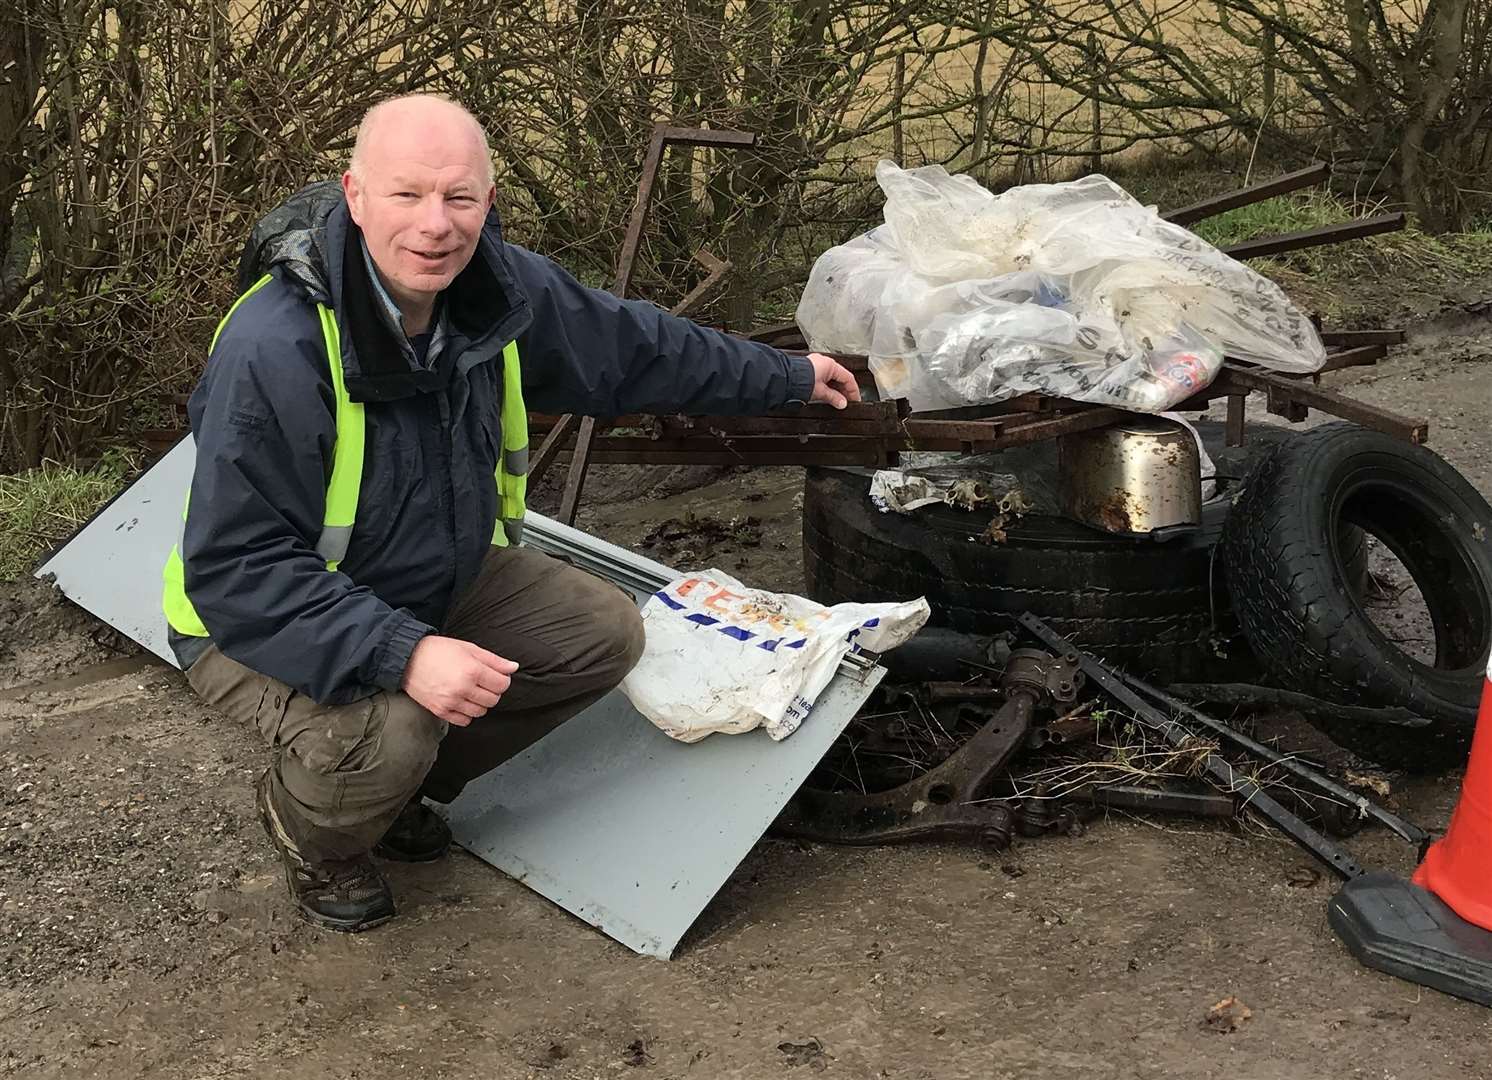 Cllr Mike Sole next to a collection of rubbish that had previously been dumped at spots across Bishopsbourne